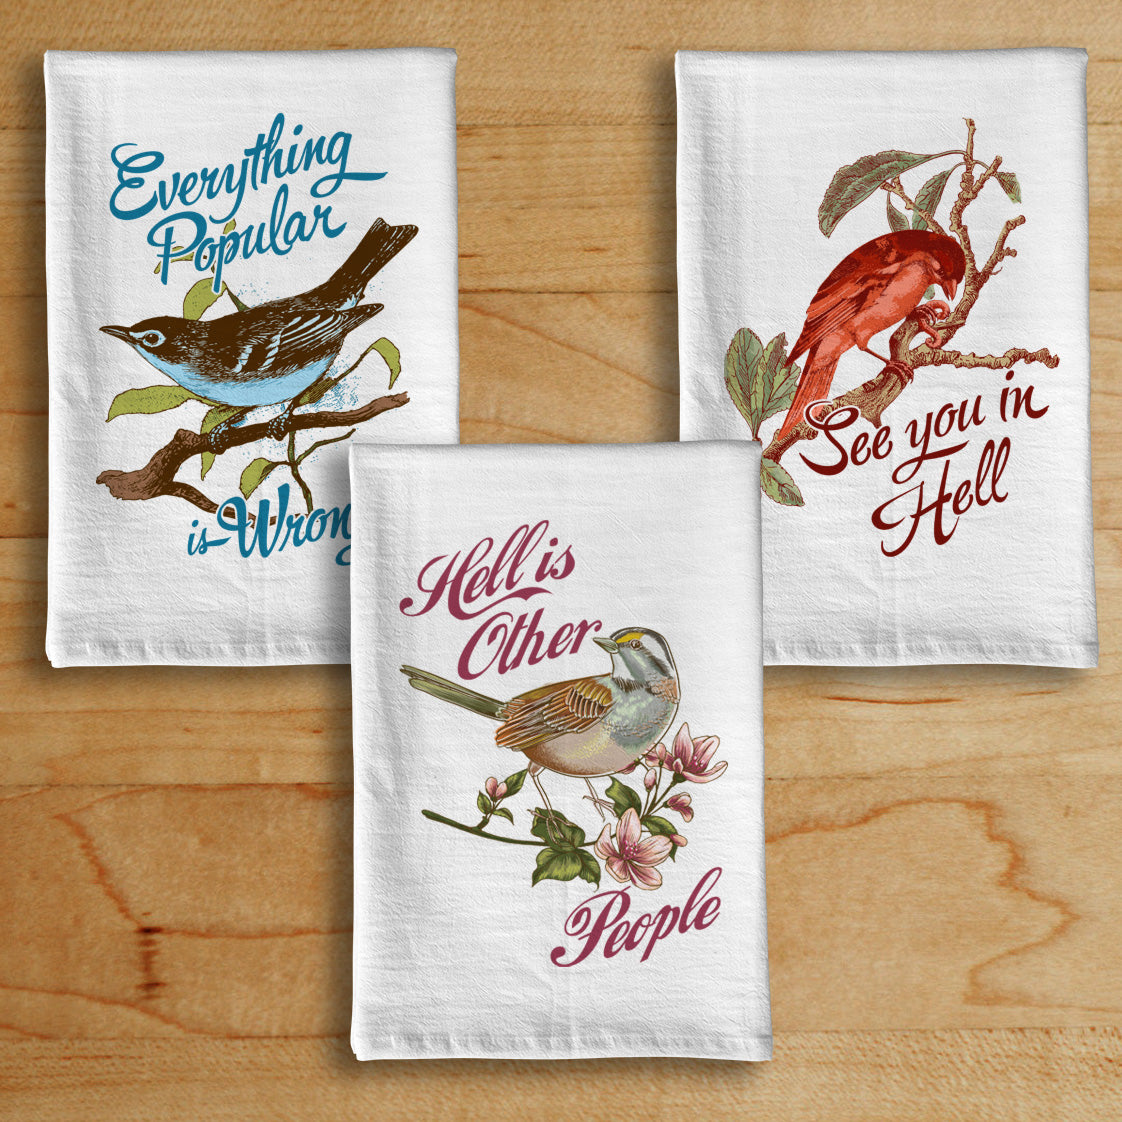 Funny, Absorbent Dish Towels That Match Your Kitchen Theme. Bring